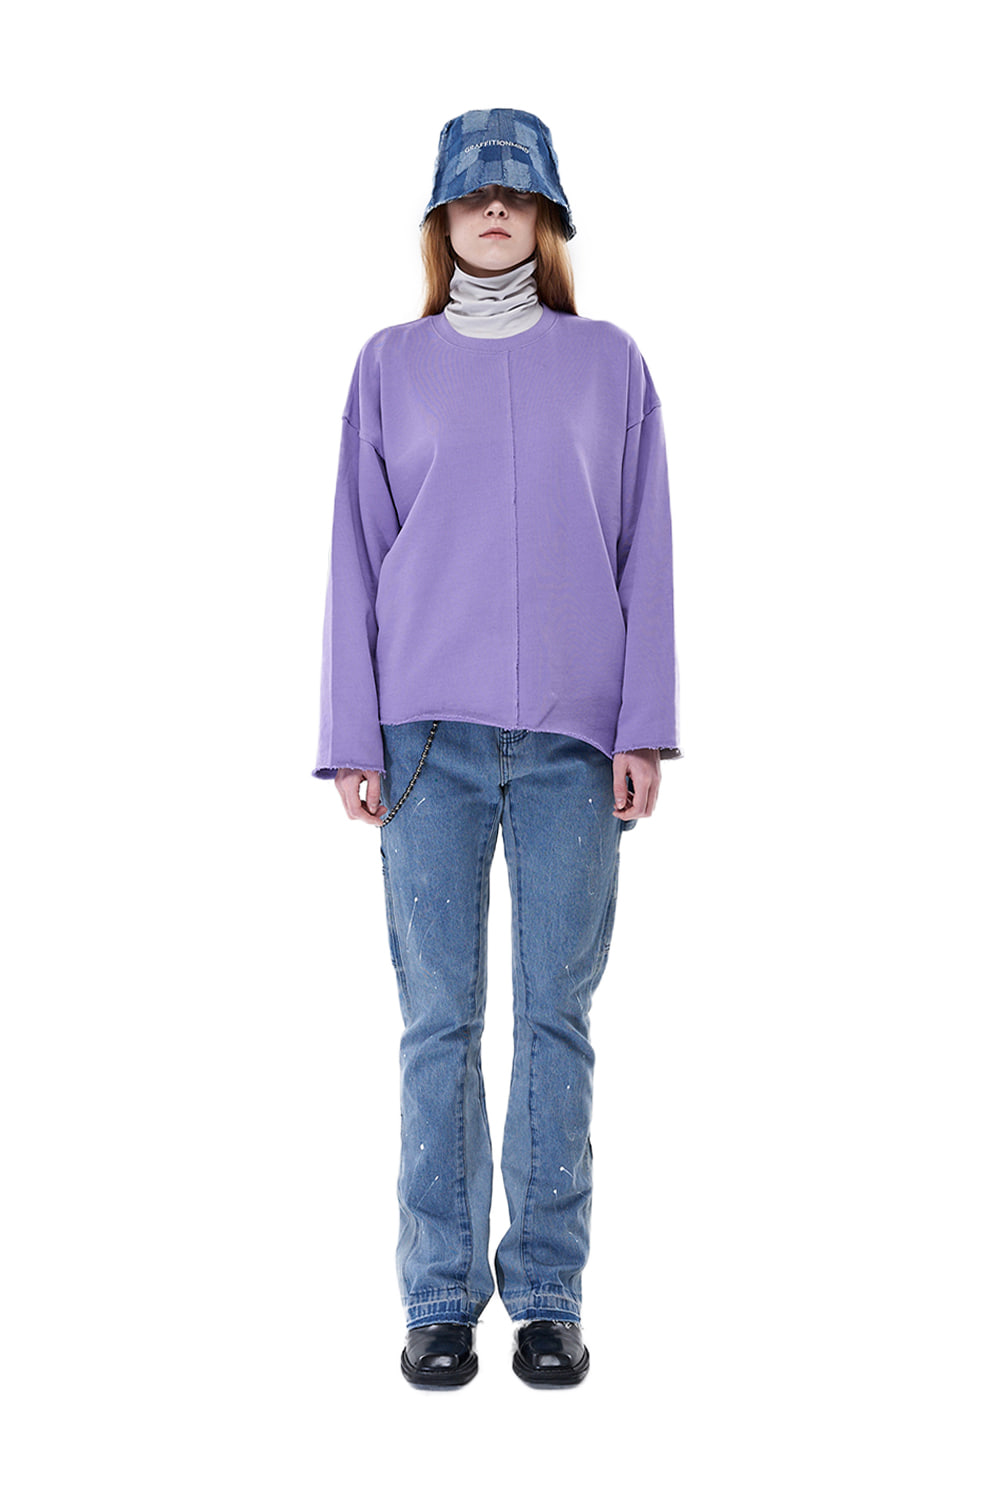 Incision Long Sleeve Tee (Purple)GRAFFITIONMIND